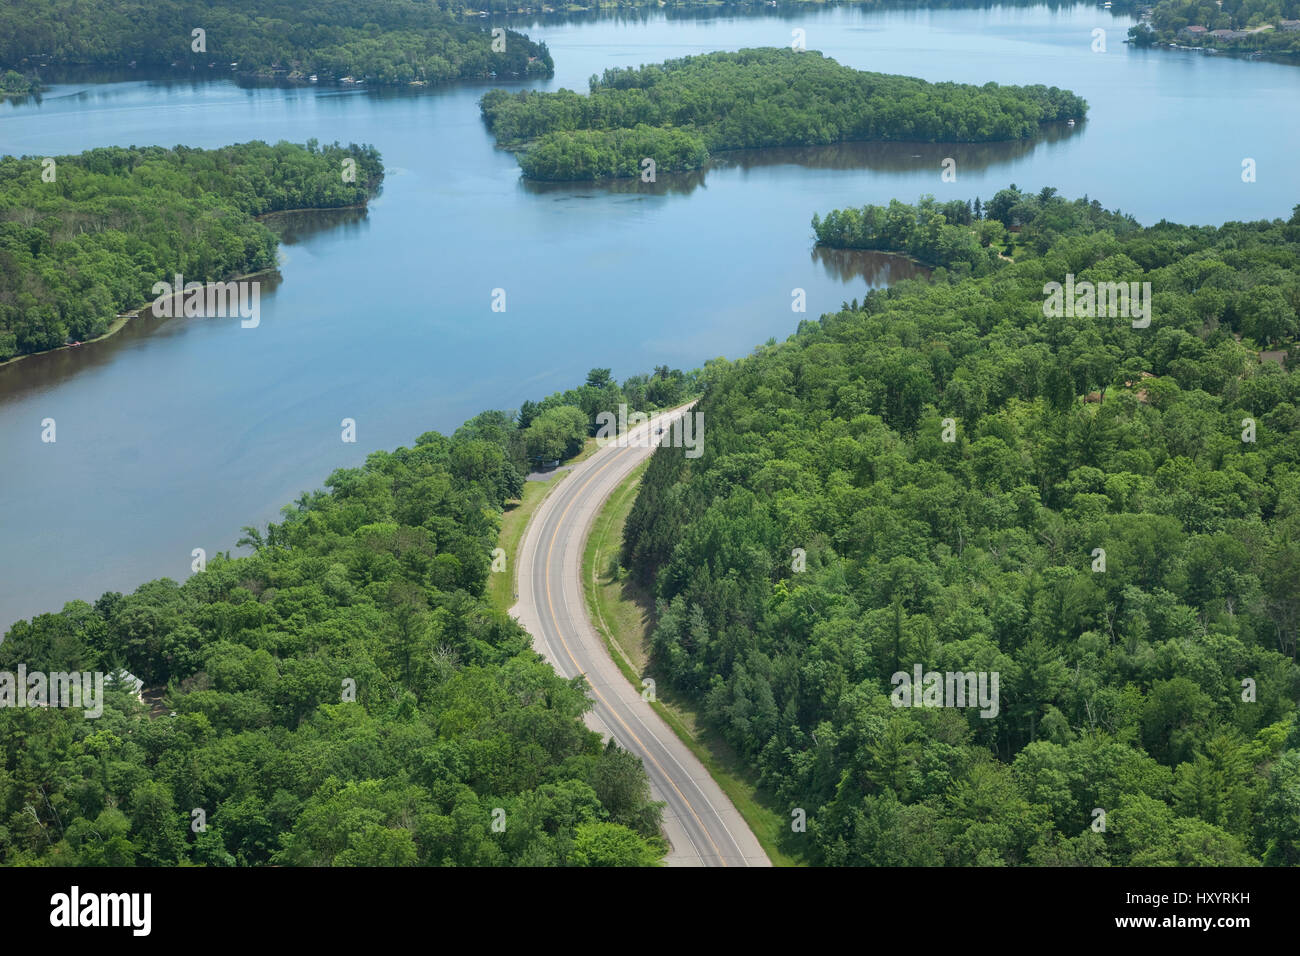 An aerial view of the Mississippi River and a curving road near Brainerd, Minnesota Stock Photo